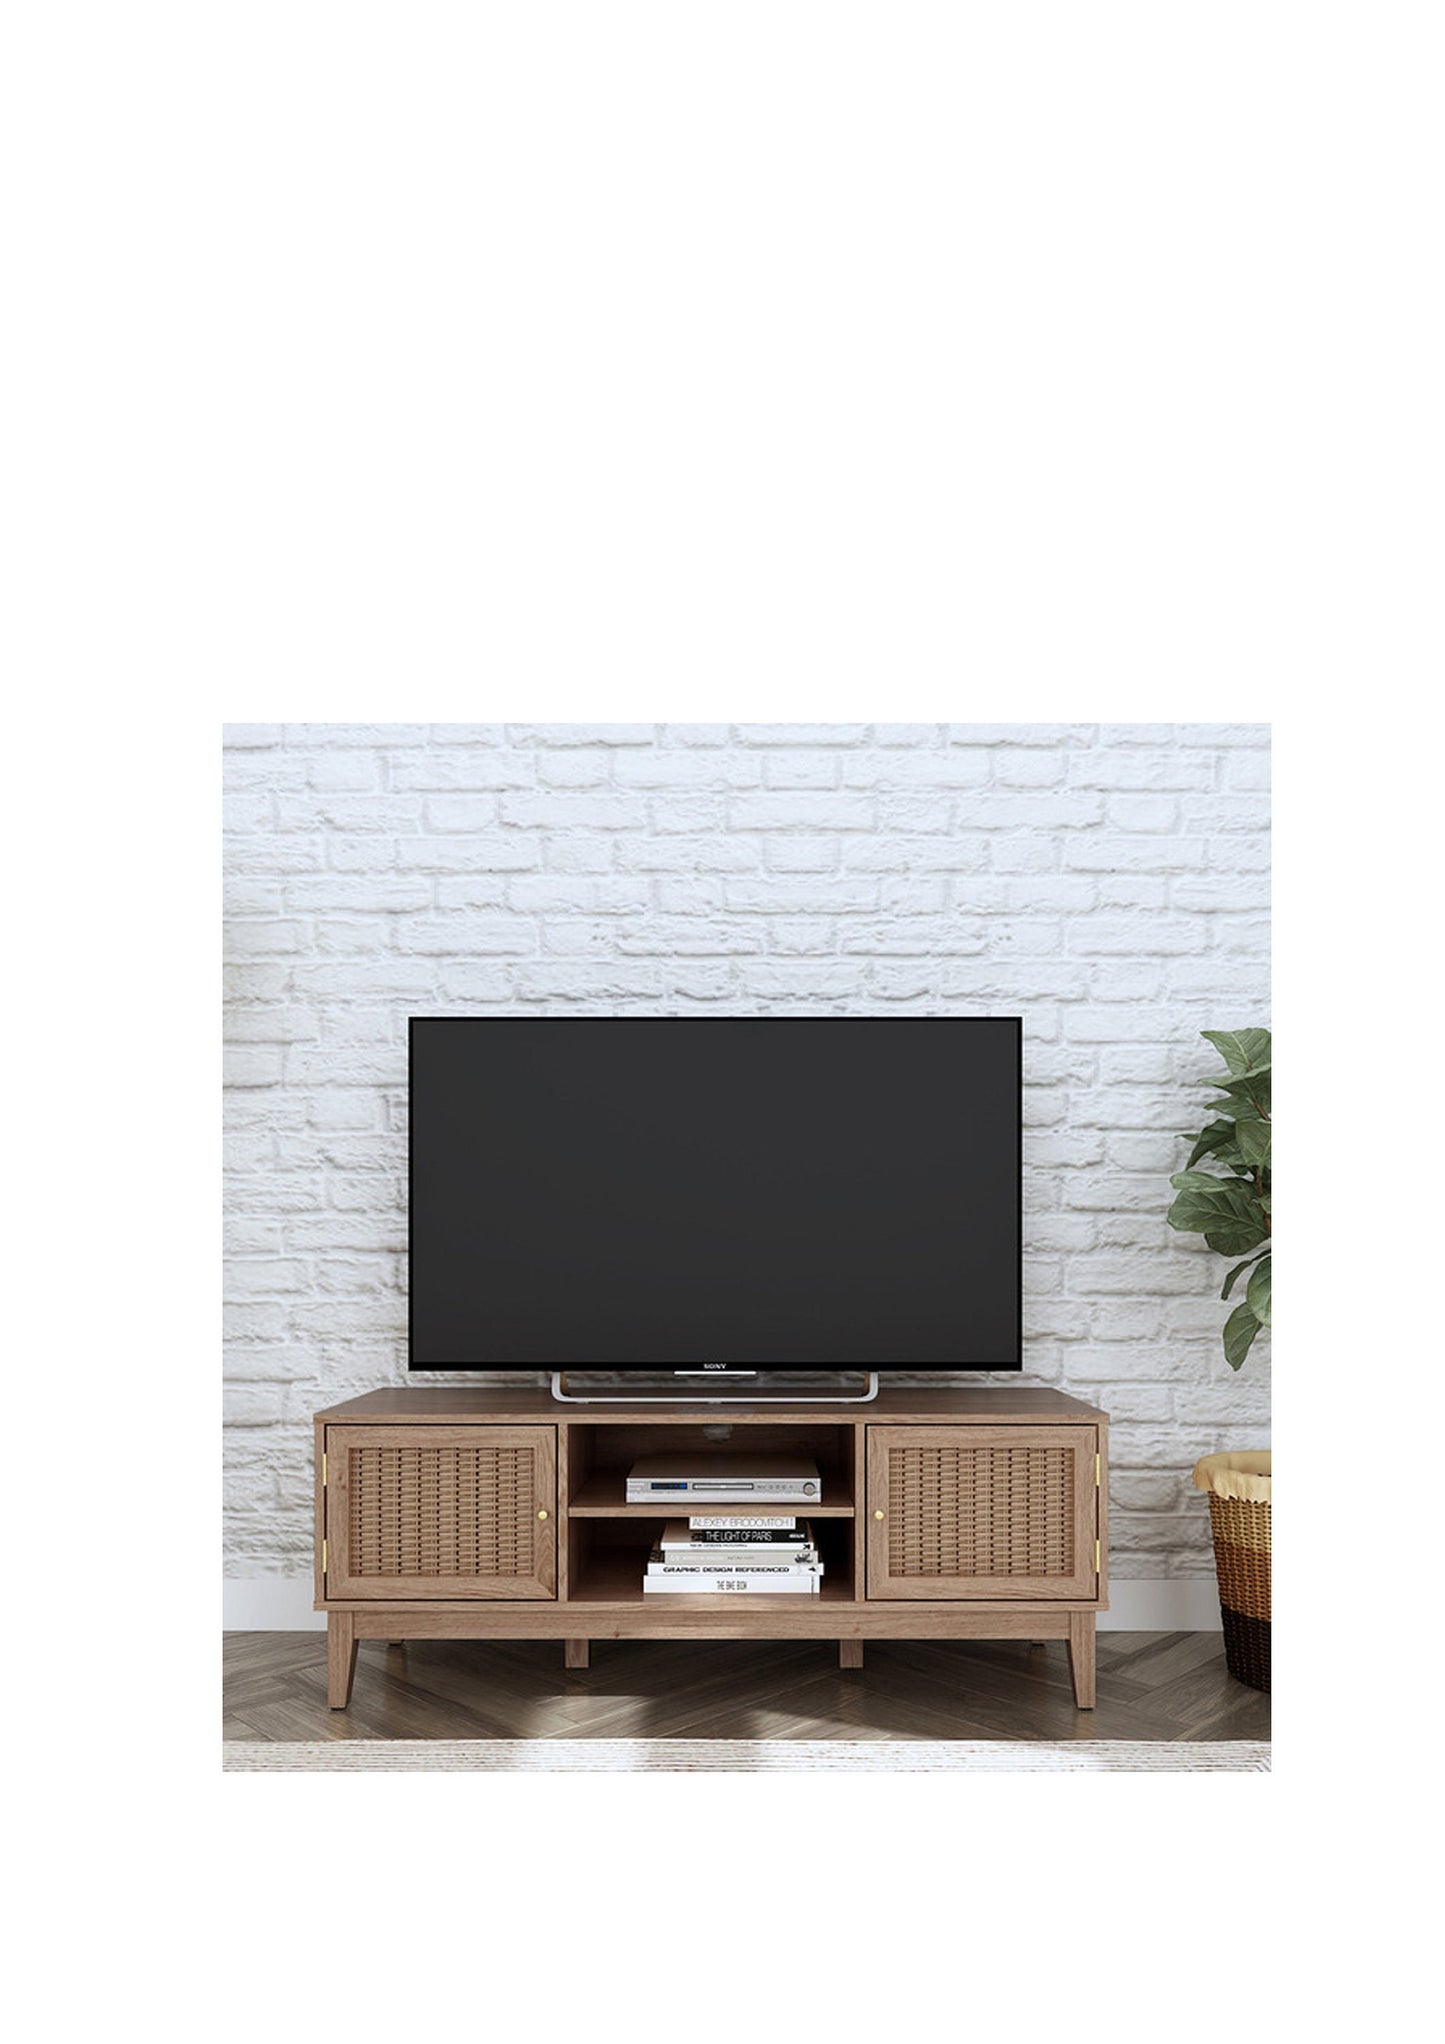 Boho Style Rattan and wood TV Unit with gold Handles - Pre Order for October